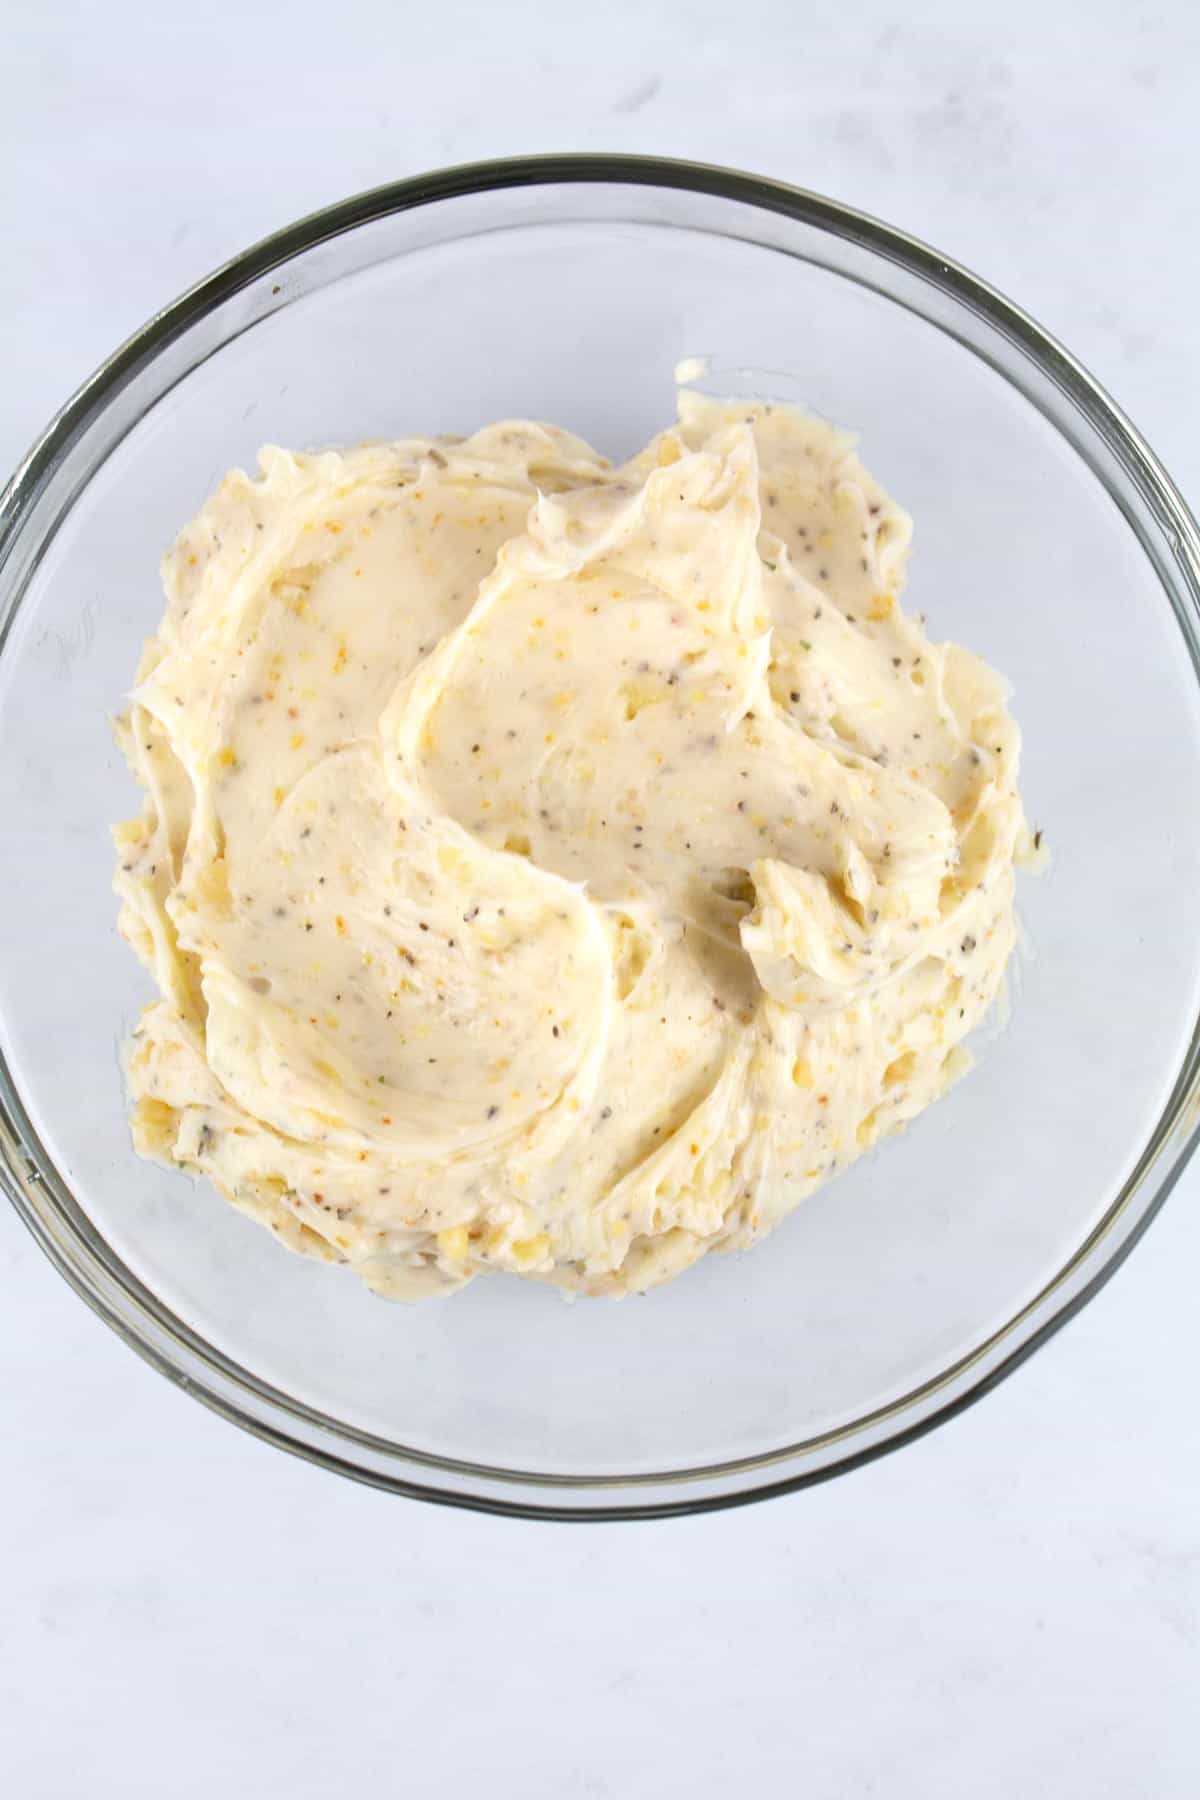 Flavored butter with herbs and seasonings in a bowl.